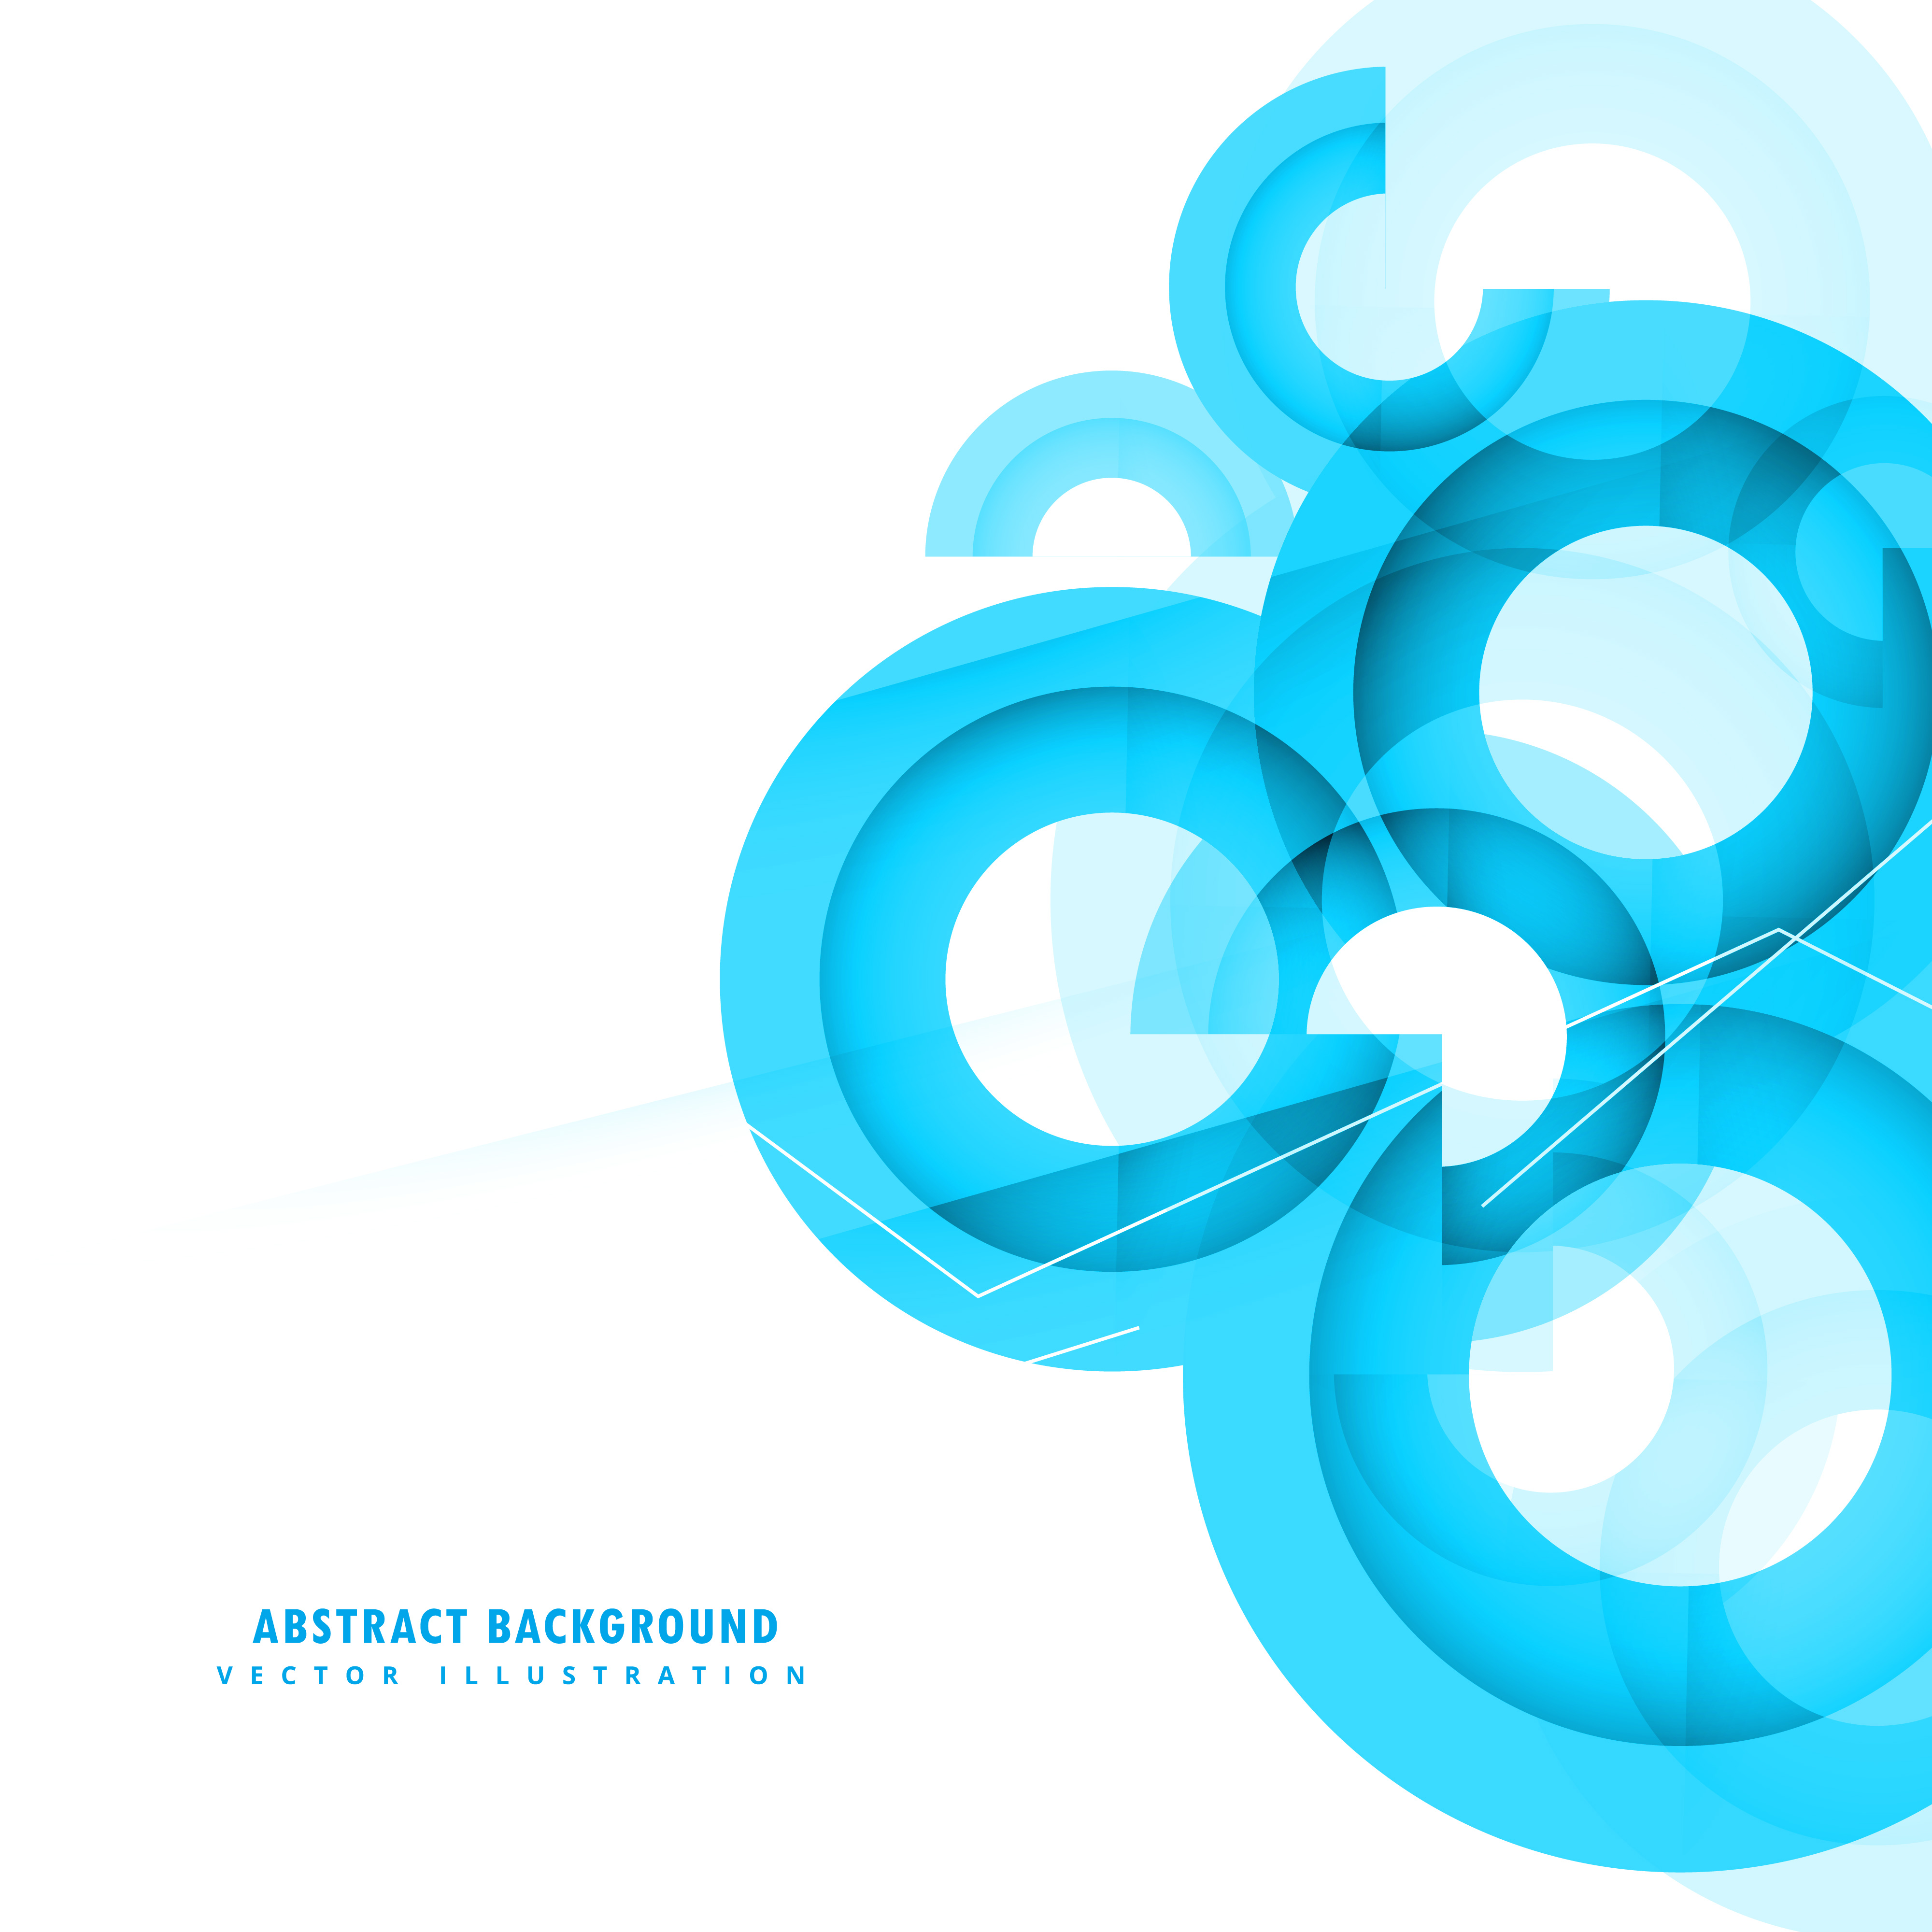 Download abstract blue circles background design - Download Free ...